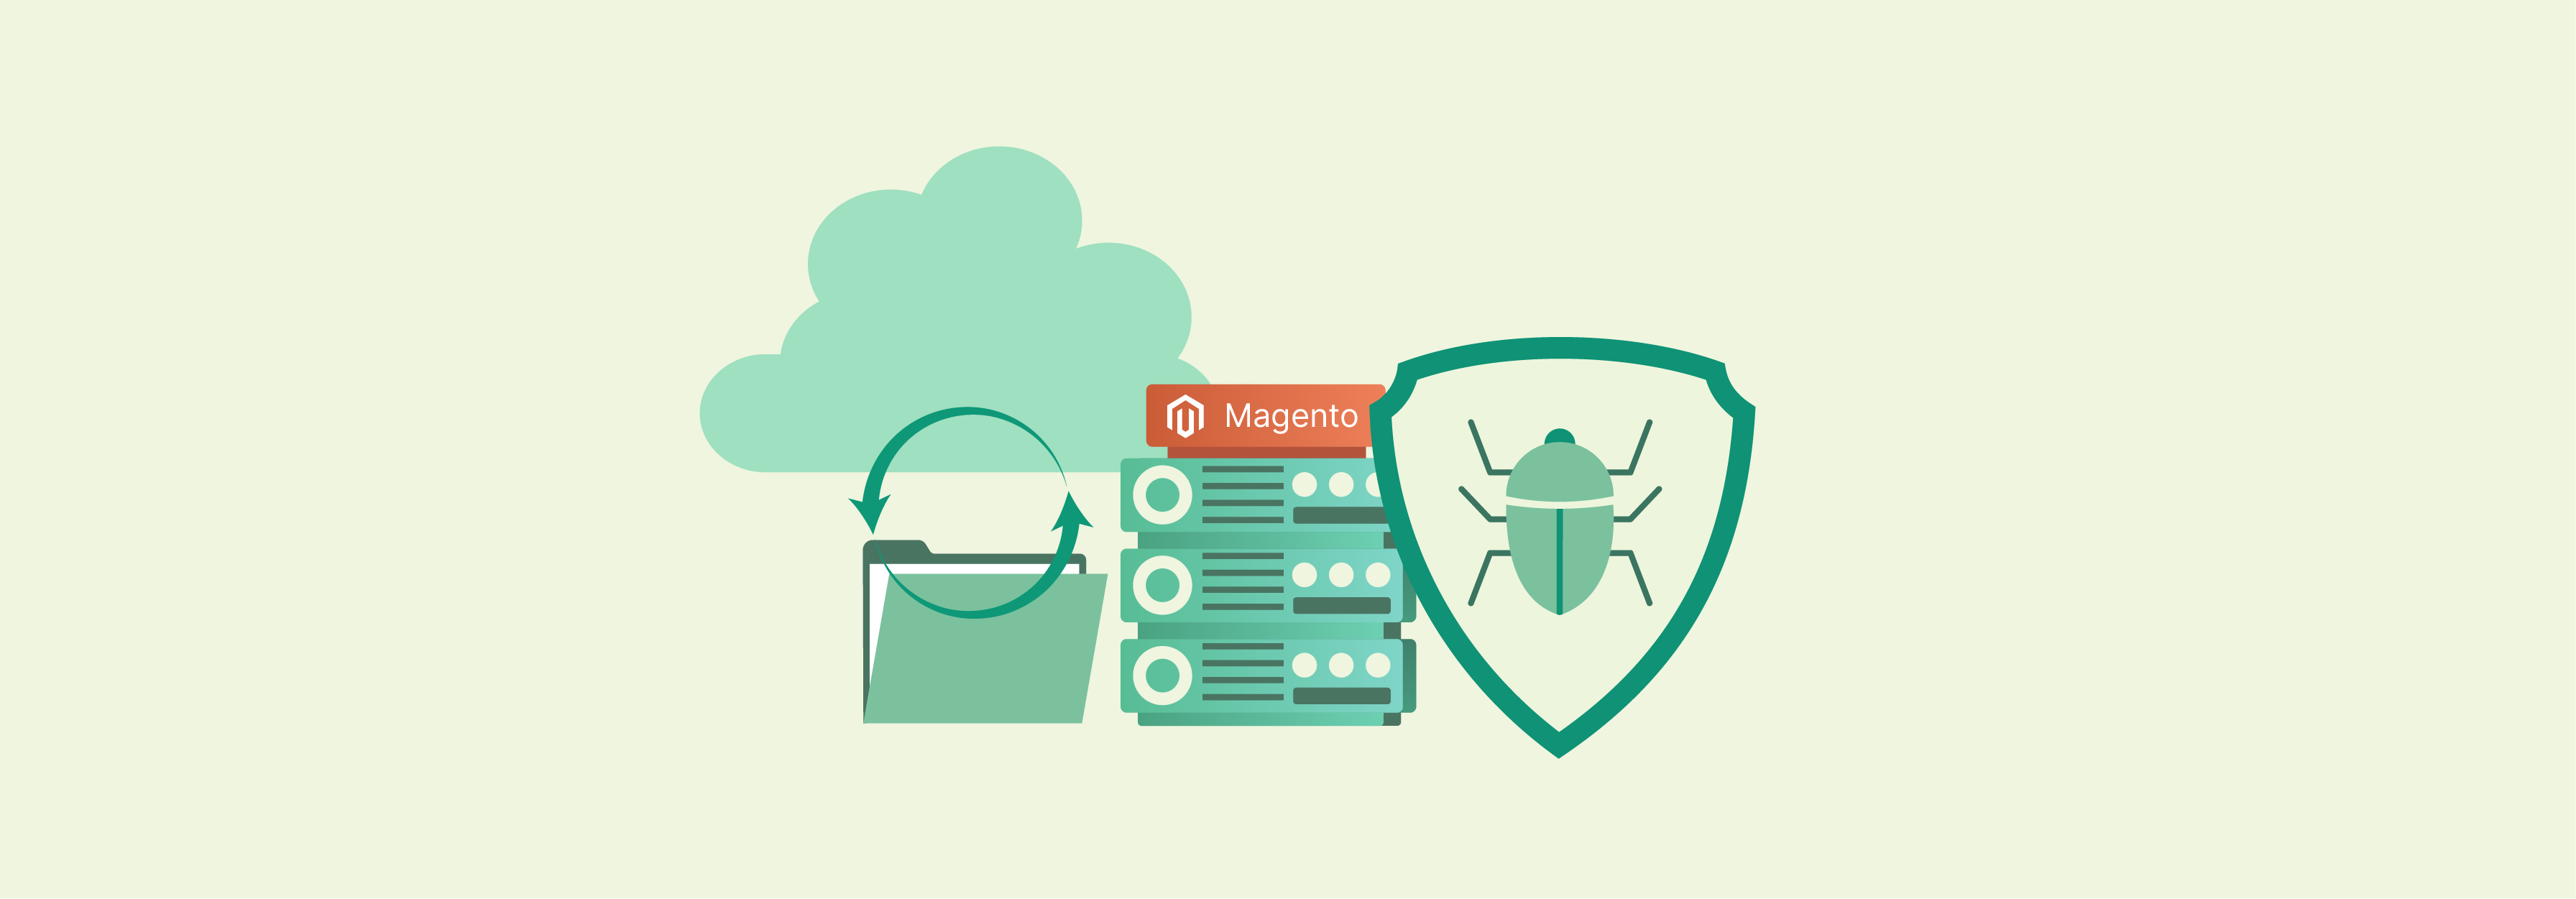 Best hosting company for magento ensures backups and malware protection